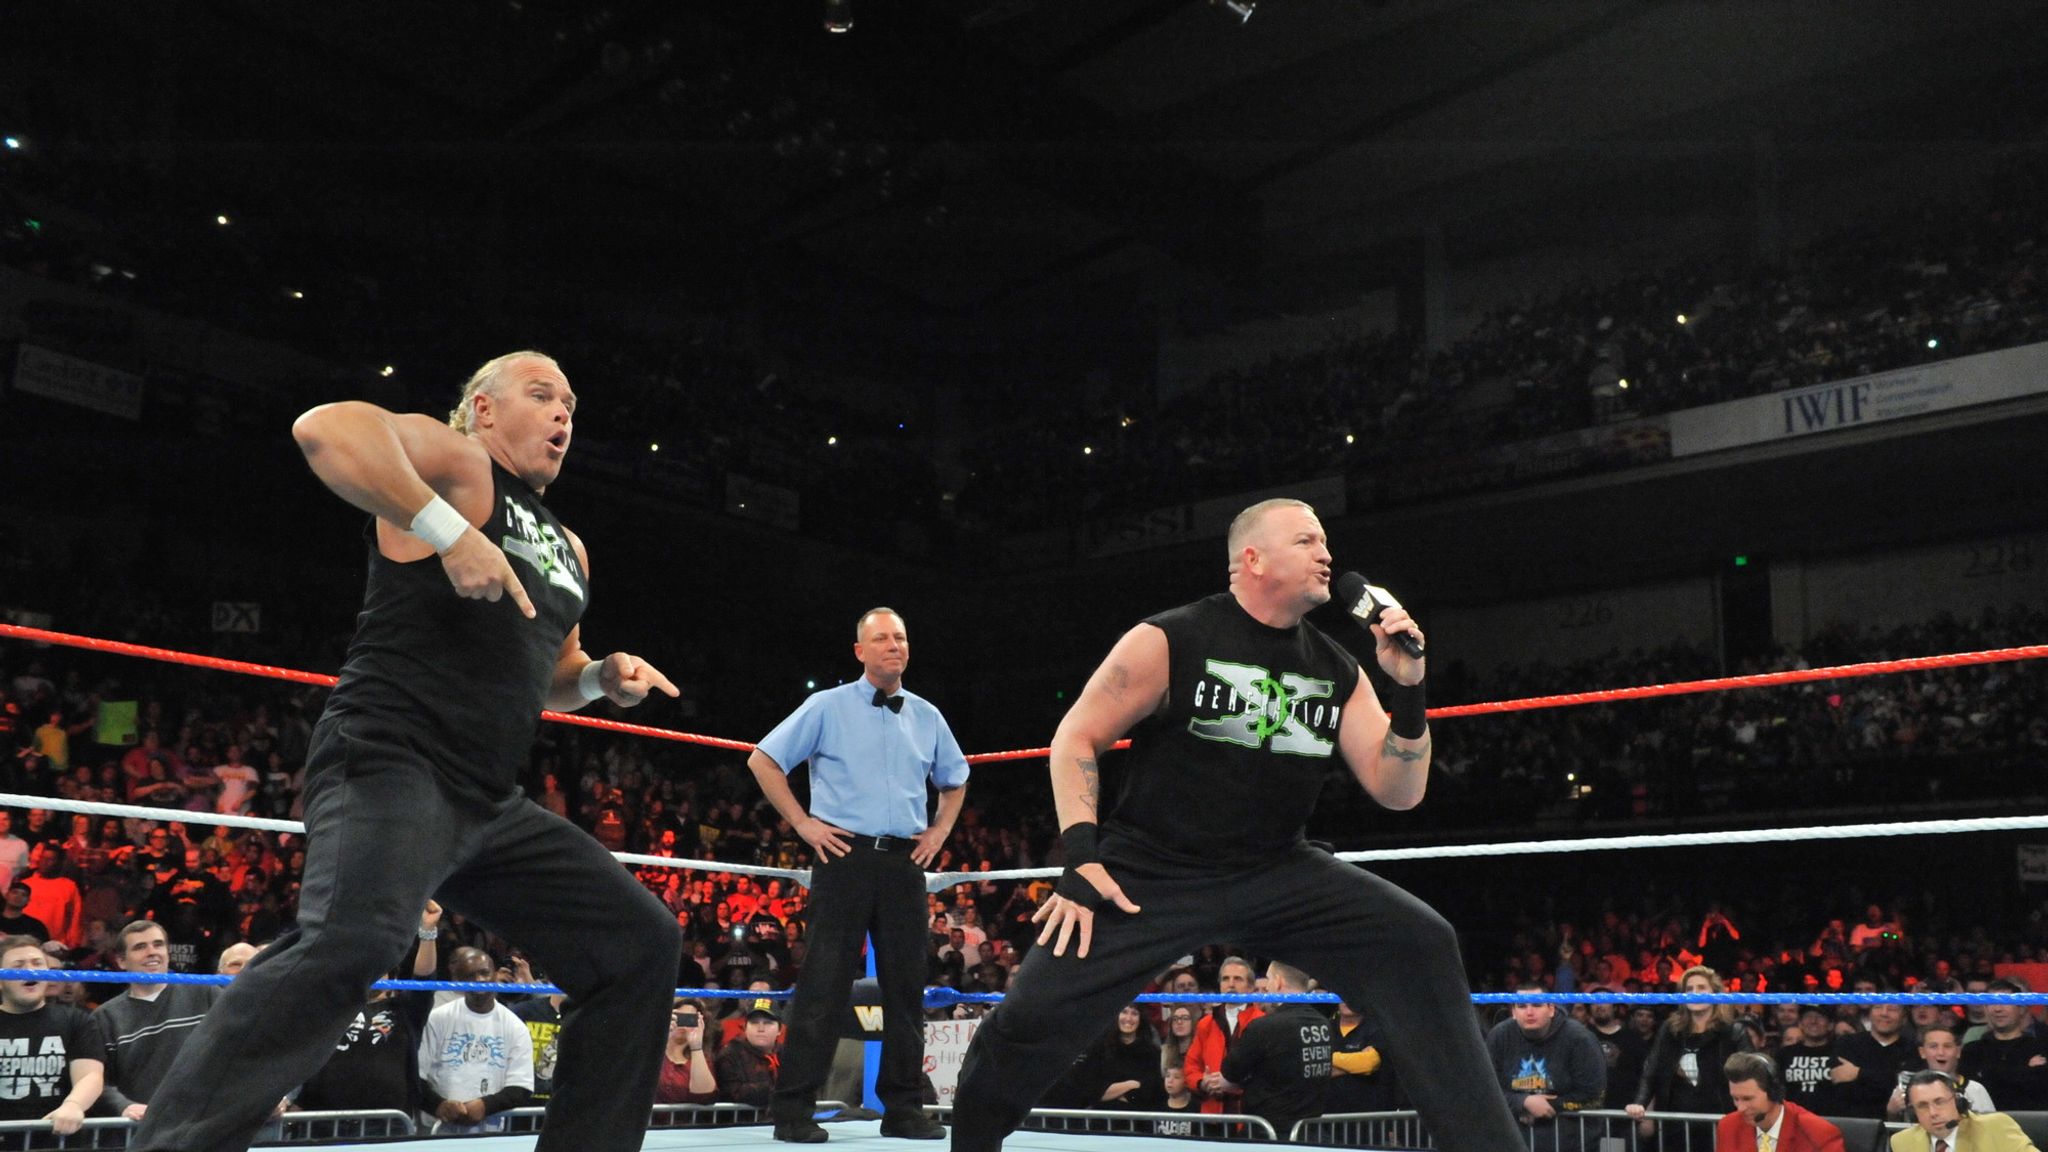 WWE Royal Rumble 2014: New Age Outlaws and Brock Lesnar made waves in Pitts...